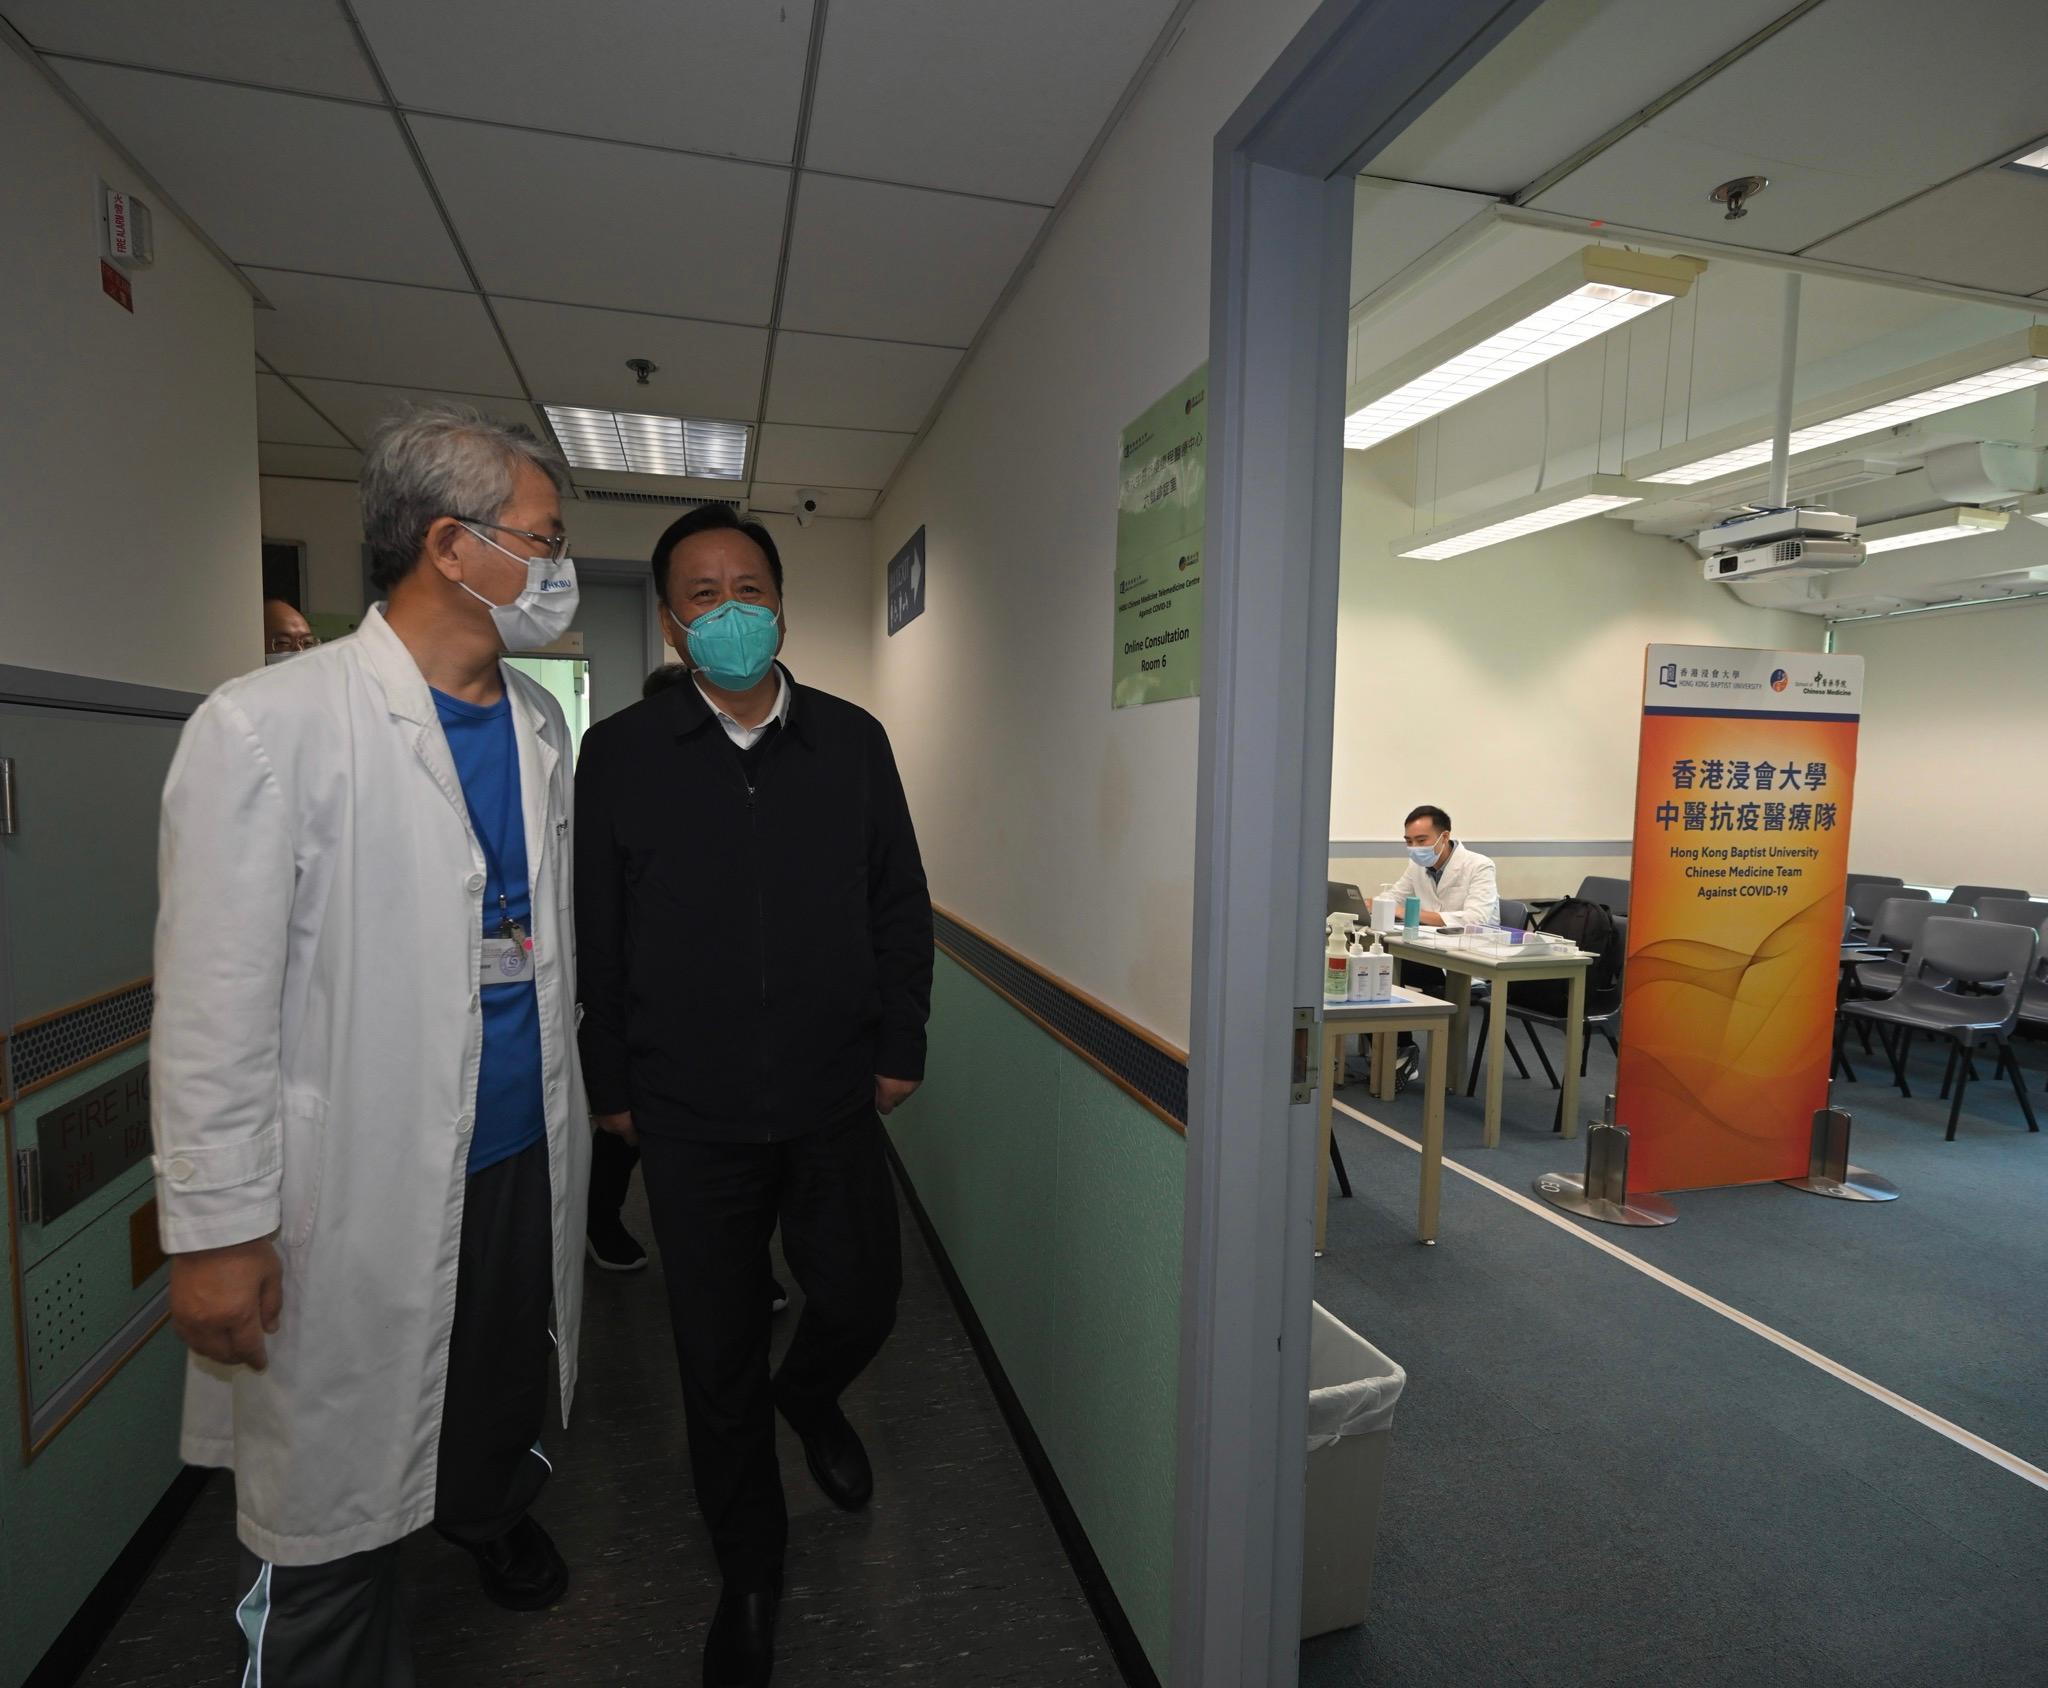 The expert group led by the leader of the Mainland Chinese medicine expert group of the Central Authorities, Mr Tong Xiaolin, visited the Chinese Medicine Telemedicine Centre Against COVID-19 of the Hong Kong Baptist University (HKBU) today (April 3), to learn about the free Chinese medicine prevention and treatment services provided by the university for COVID-19 patients, their close contacts and carers. Photo shows the Associate Vice-President (Chinese Medicine Development) of the HKBU, Professor Bian Zhaoxiang (first left), briefing Mr Tong (second left) on the operation of the centre.